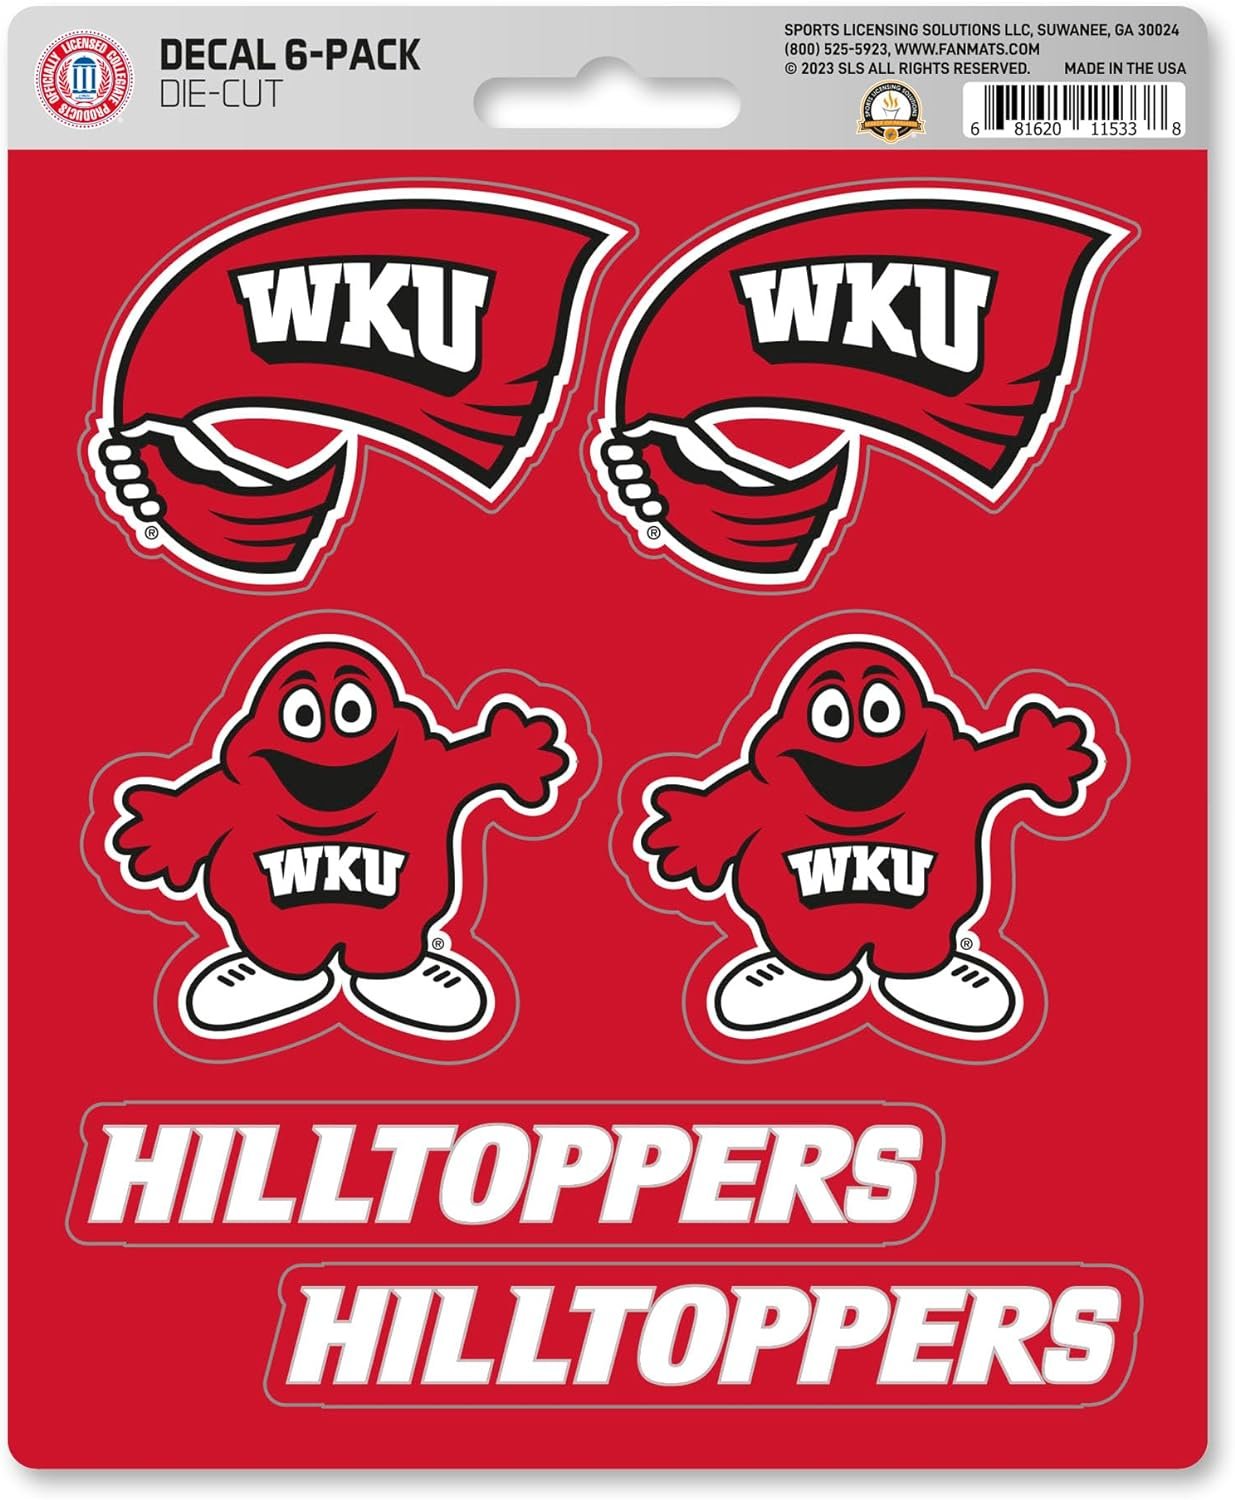 Western Kentucky University Hilltoppers 6-Piece Decal Sticker Set, 5x6 Inch Sheet, Gift for football fans for any hard surfaces around home, automotive, personal items